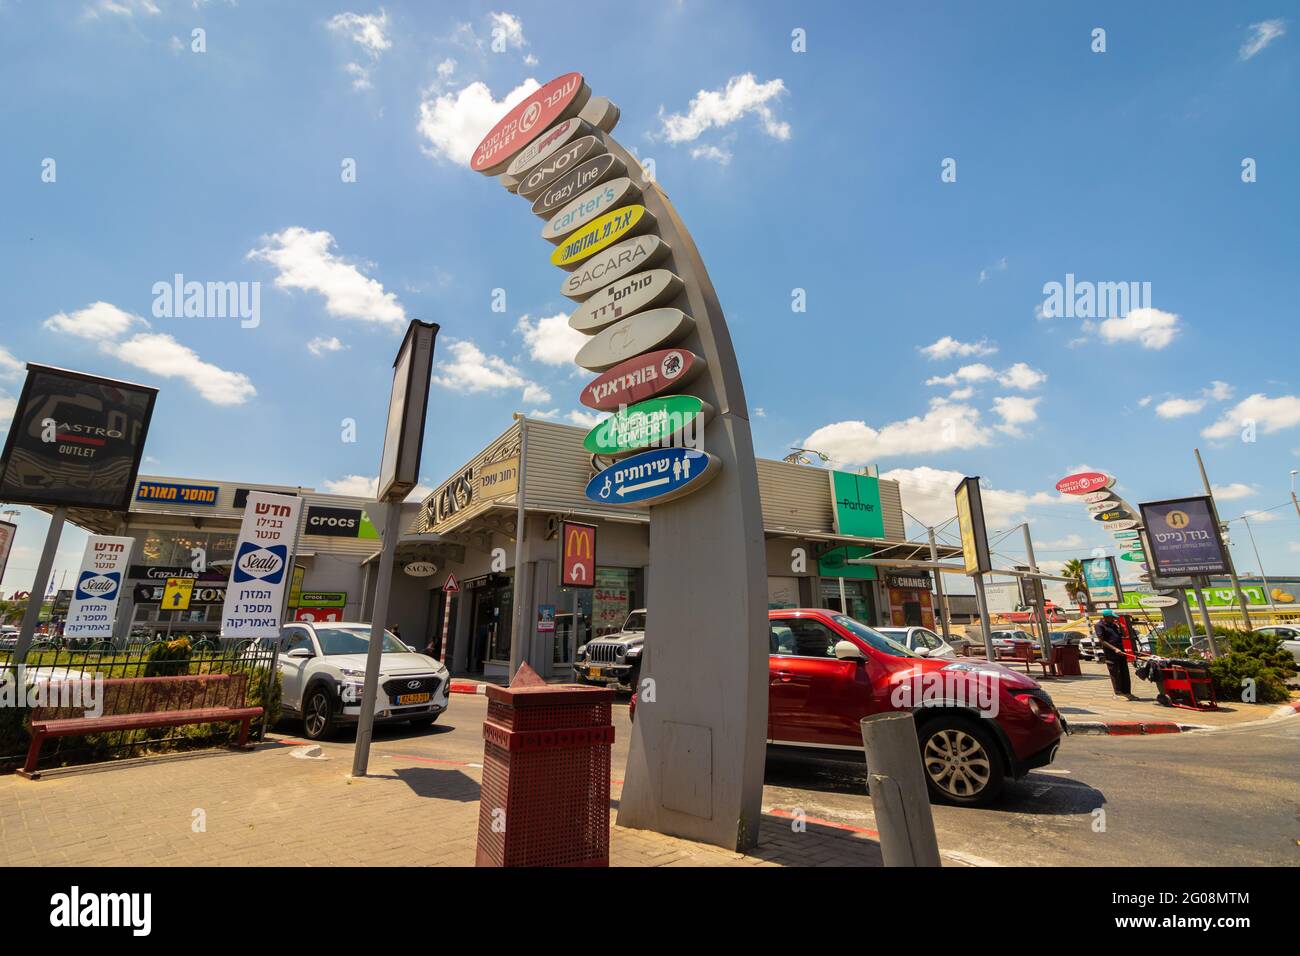 Ekron High Resolution Stock Photography and Images - Alamy